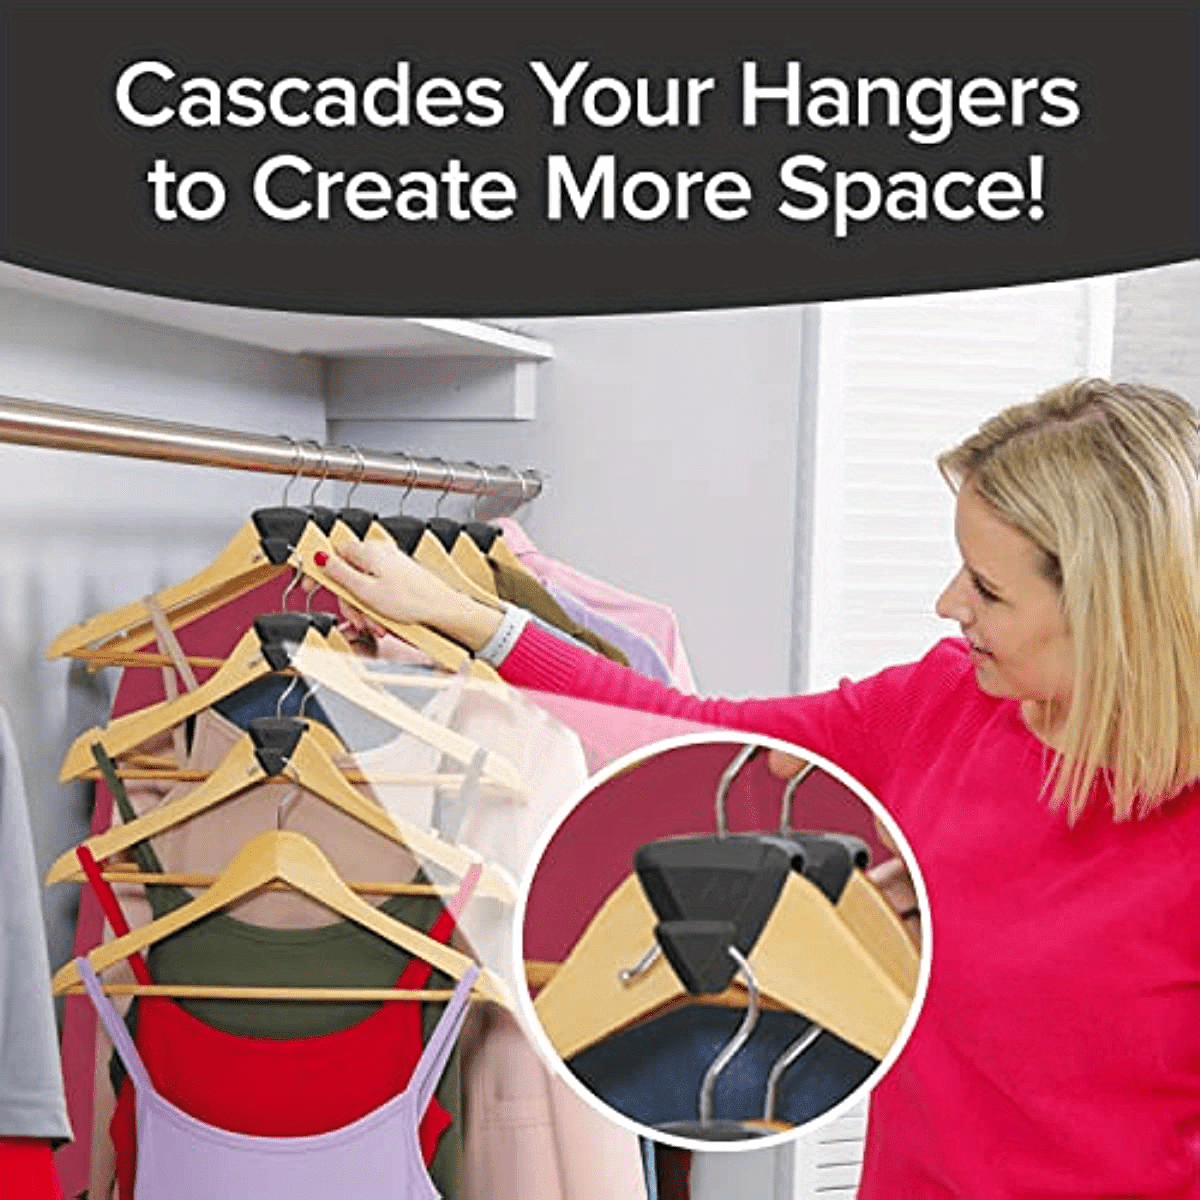 18PC SRuby Space Triangles AS-SEEN-ON-TV Premium Hanger Hooks